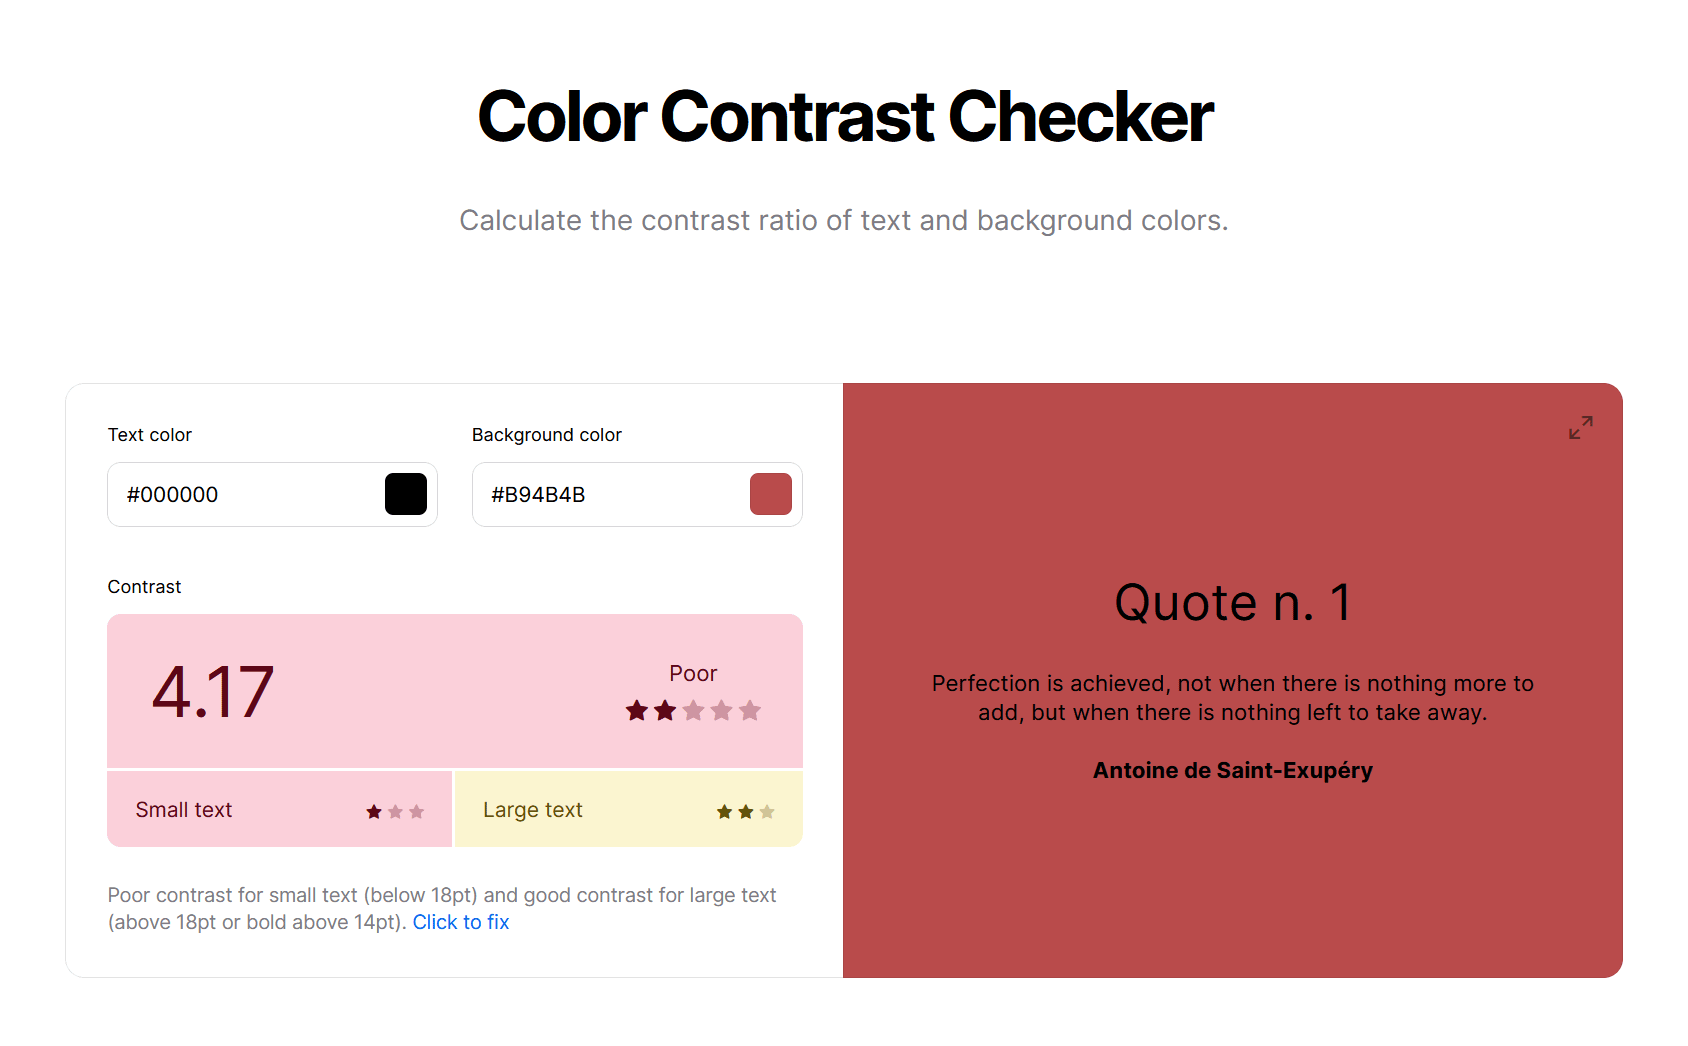 Example of a Color Contrast Checker